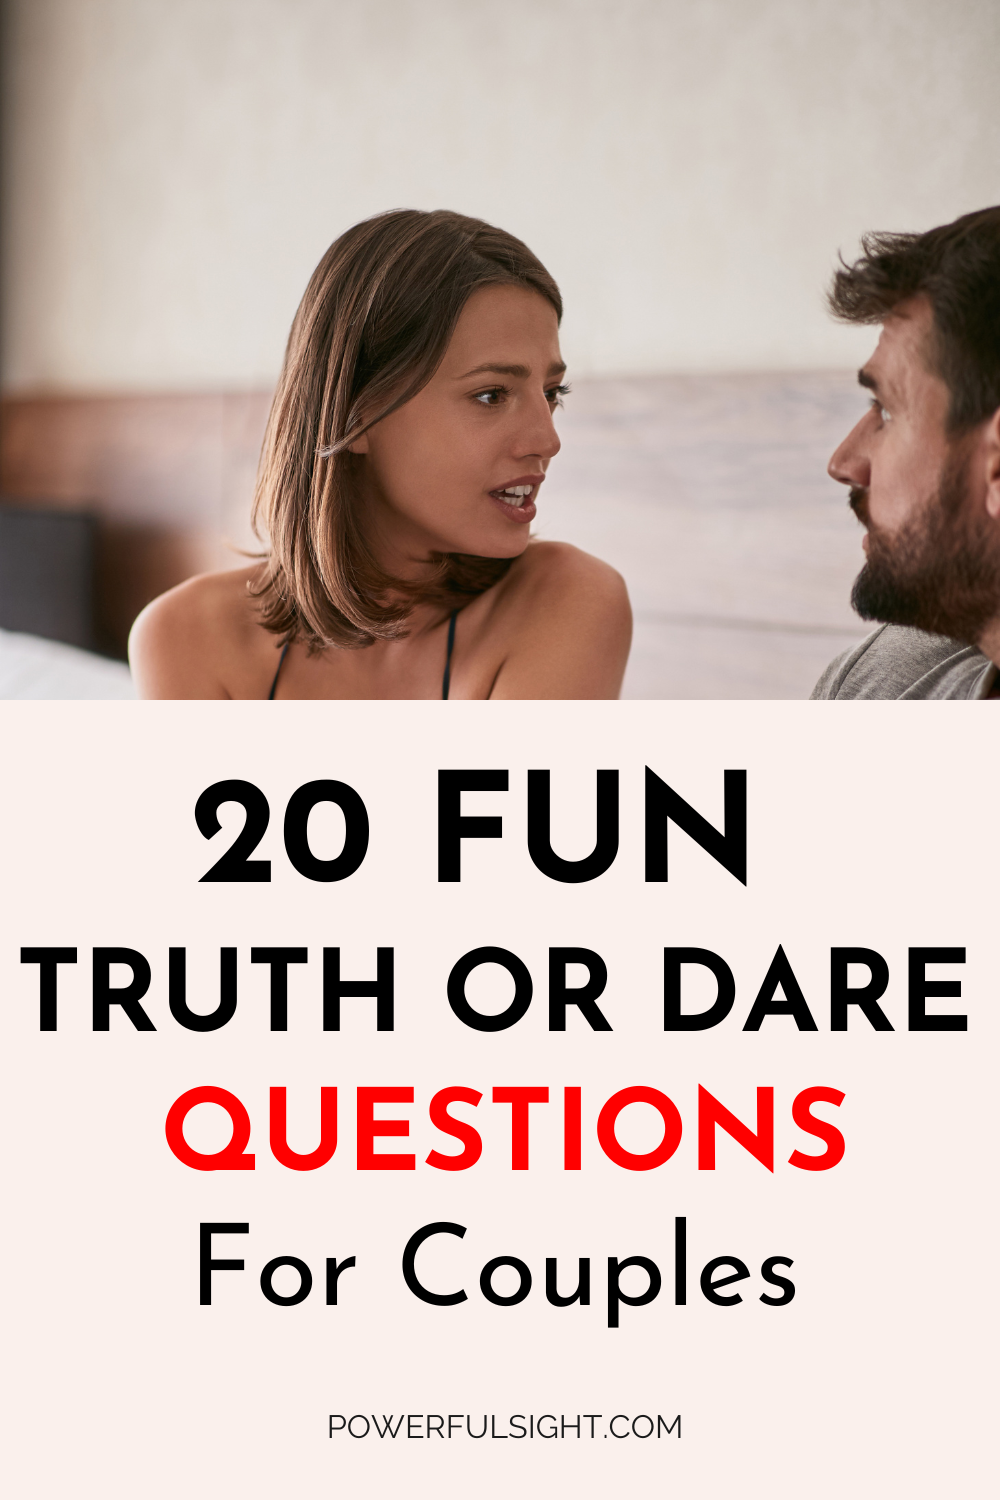 40 Fun Truth or Dare Questions For Couples - Powerful Sight